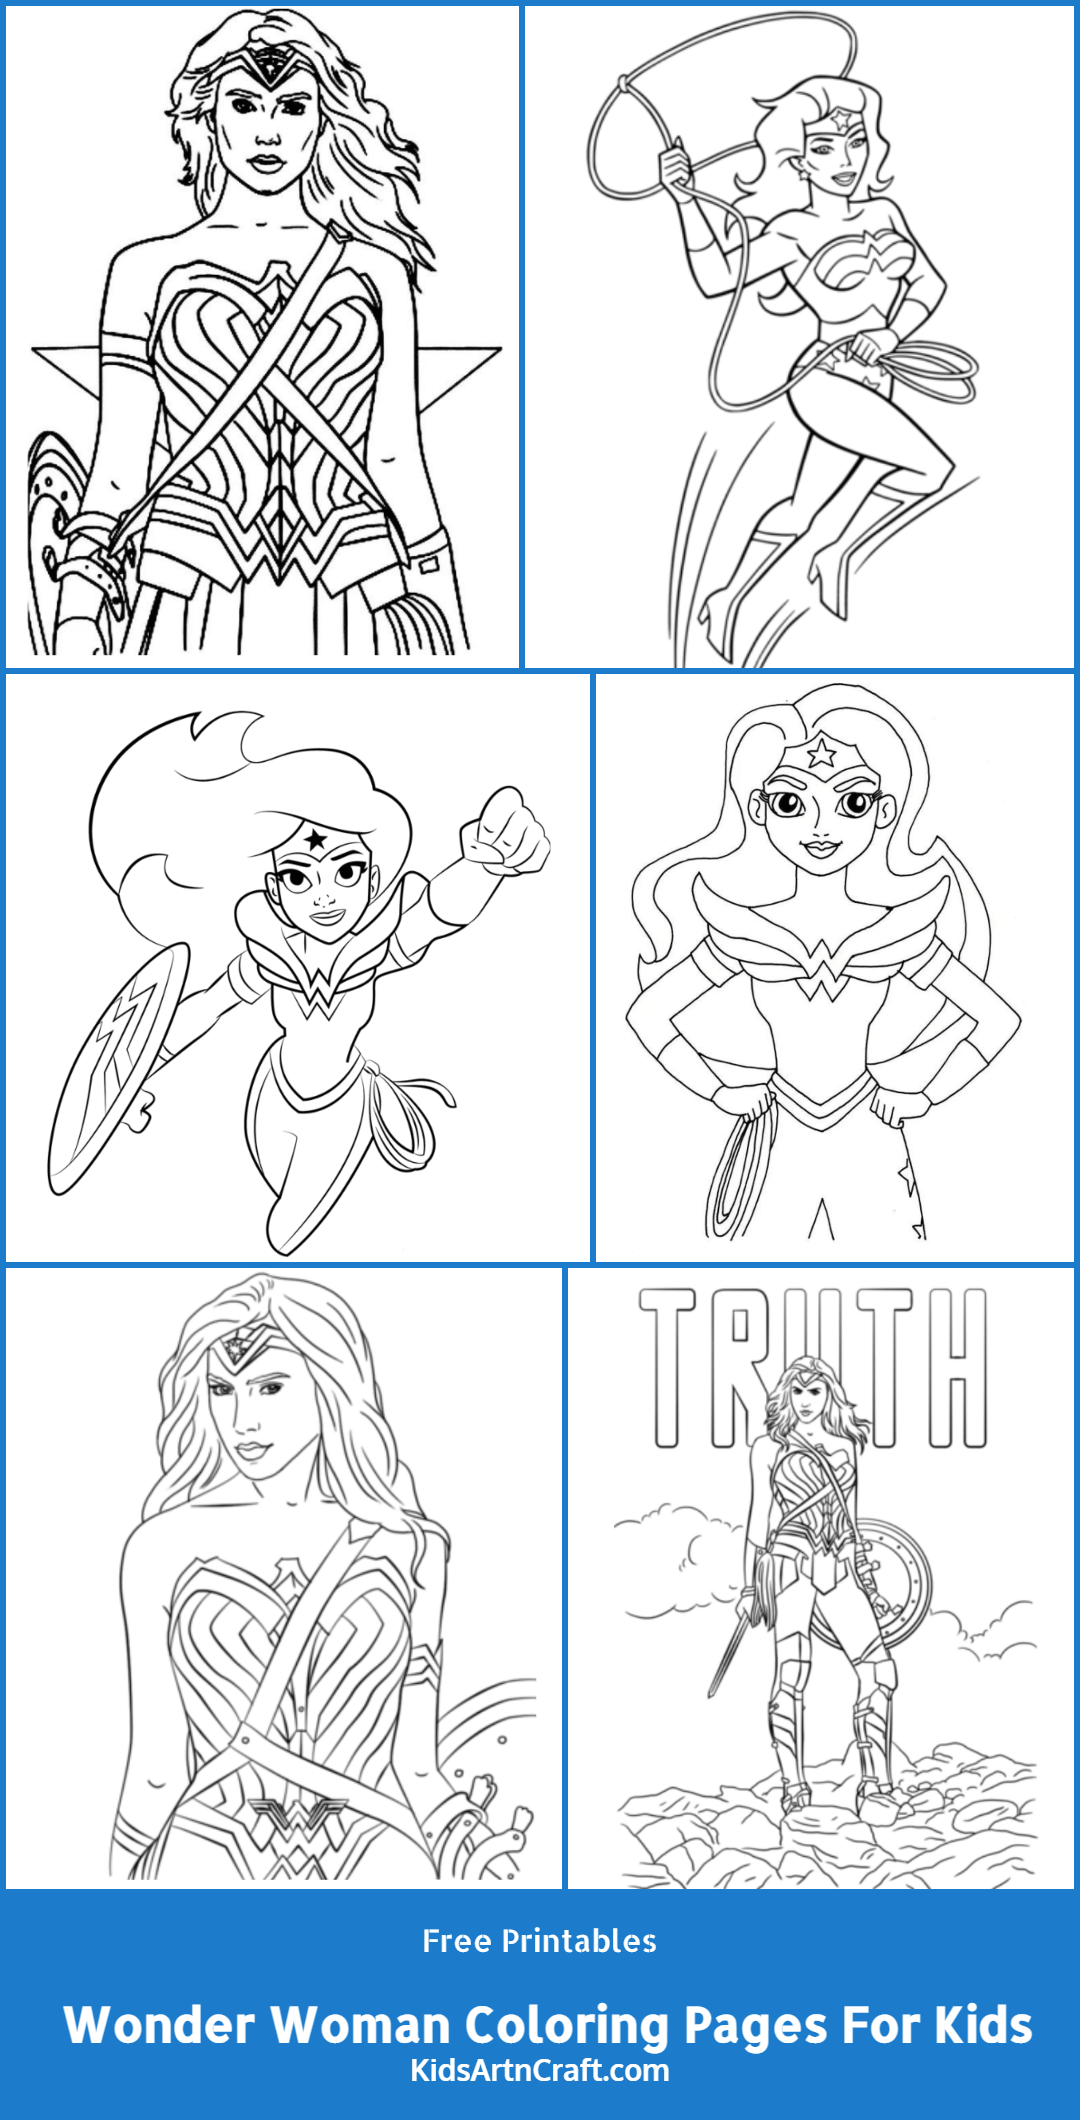 Wonder Woman Coloring Pages For Kids – Free Printables